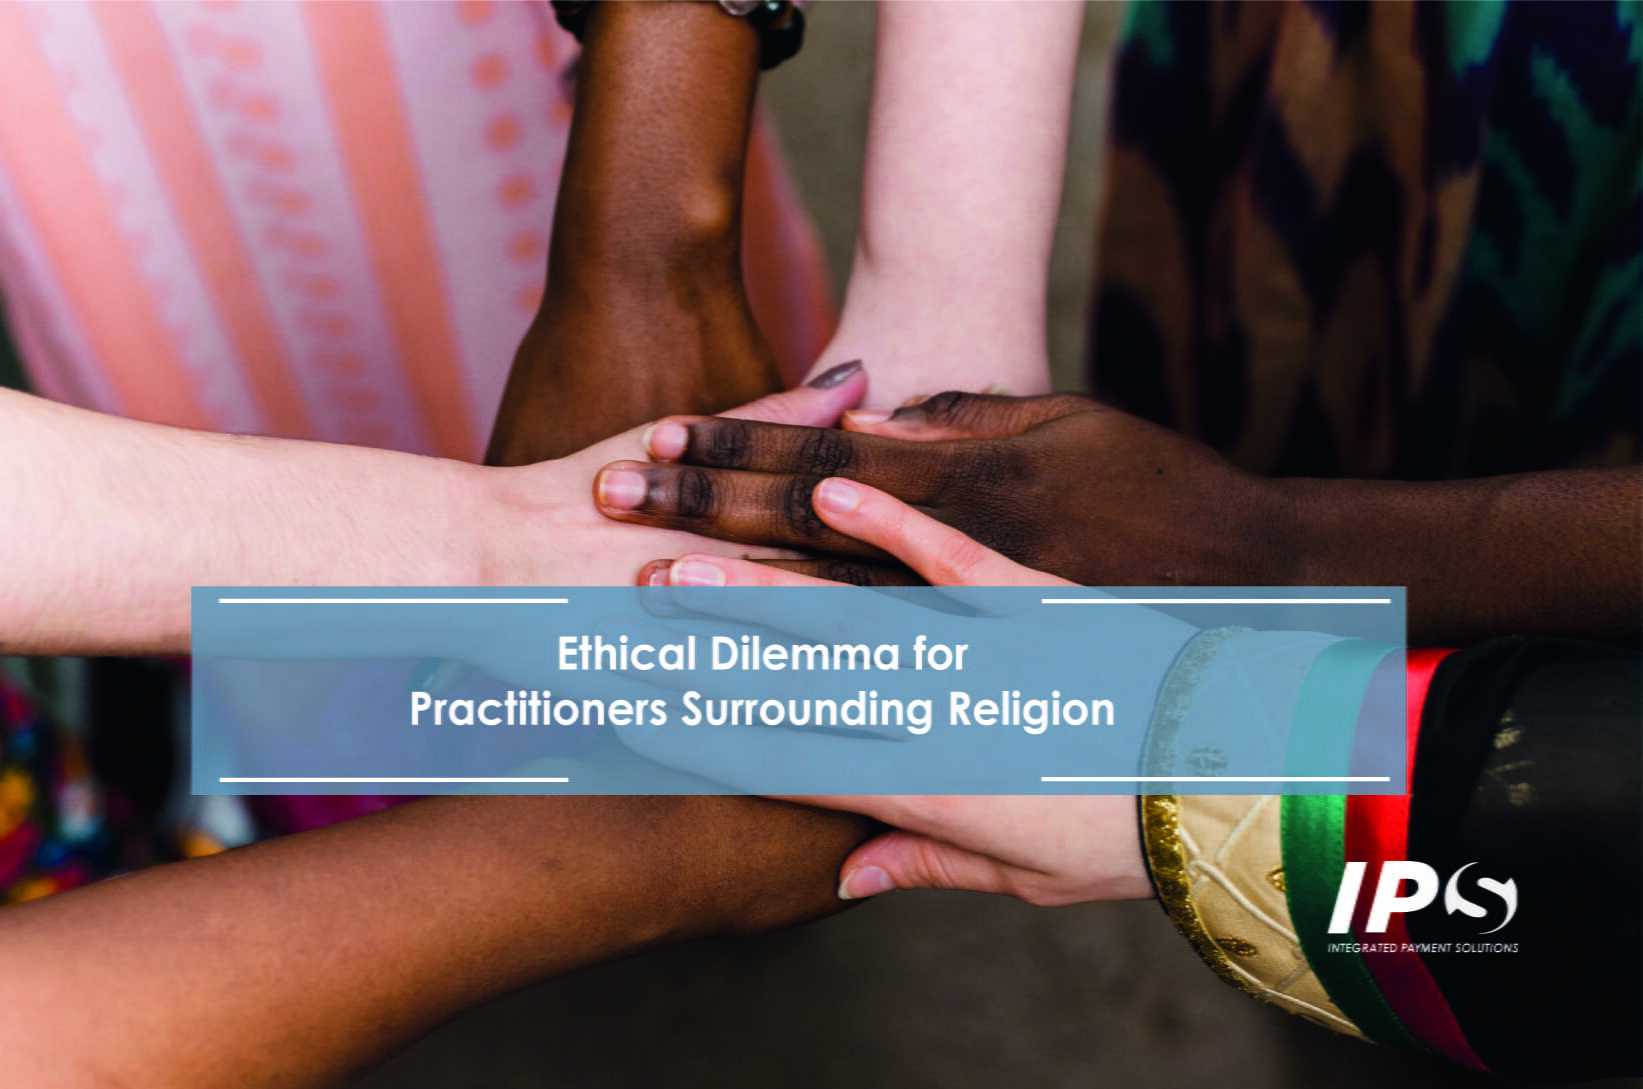 Ethical Dilemmas for Practitioners Surrounding Religion